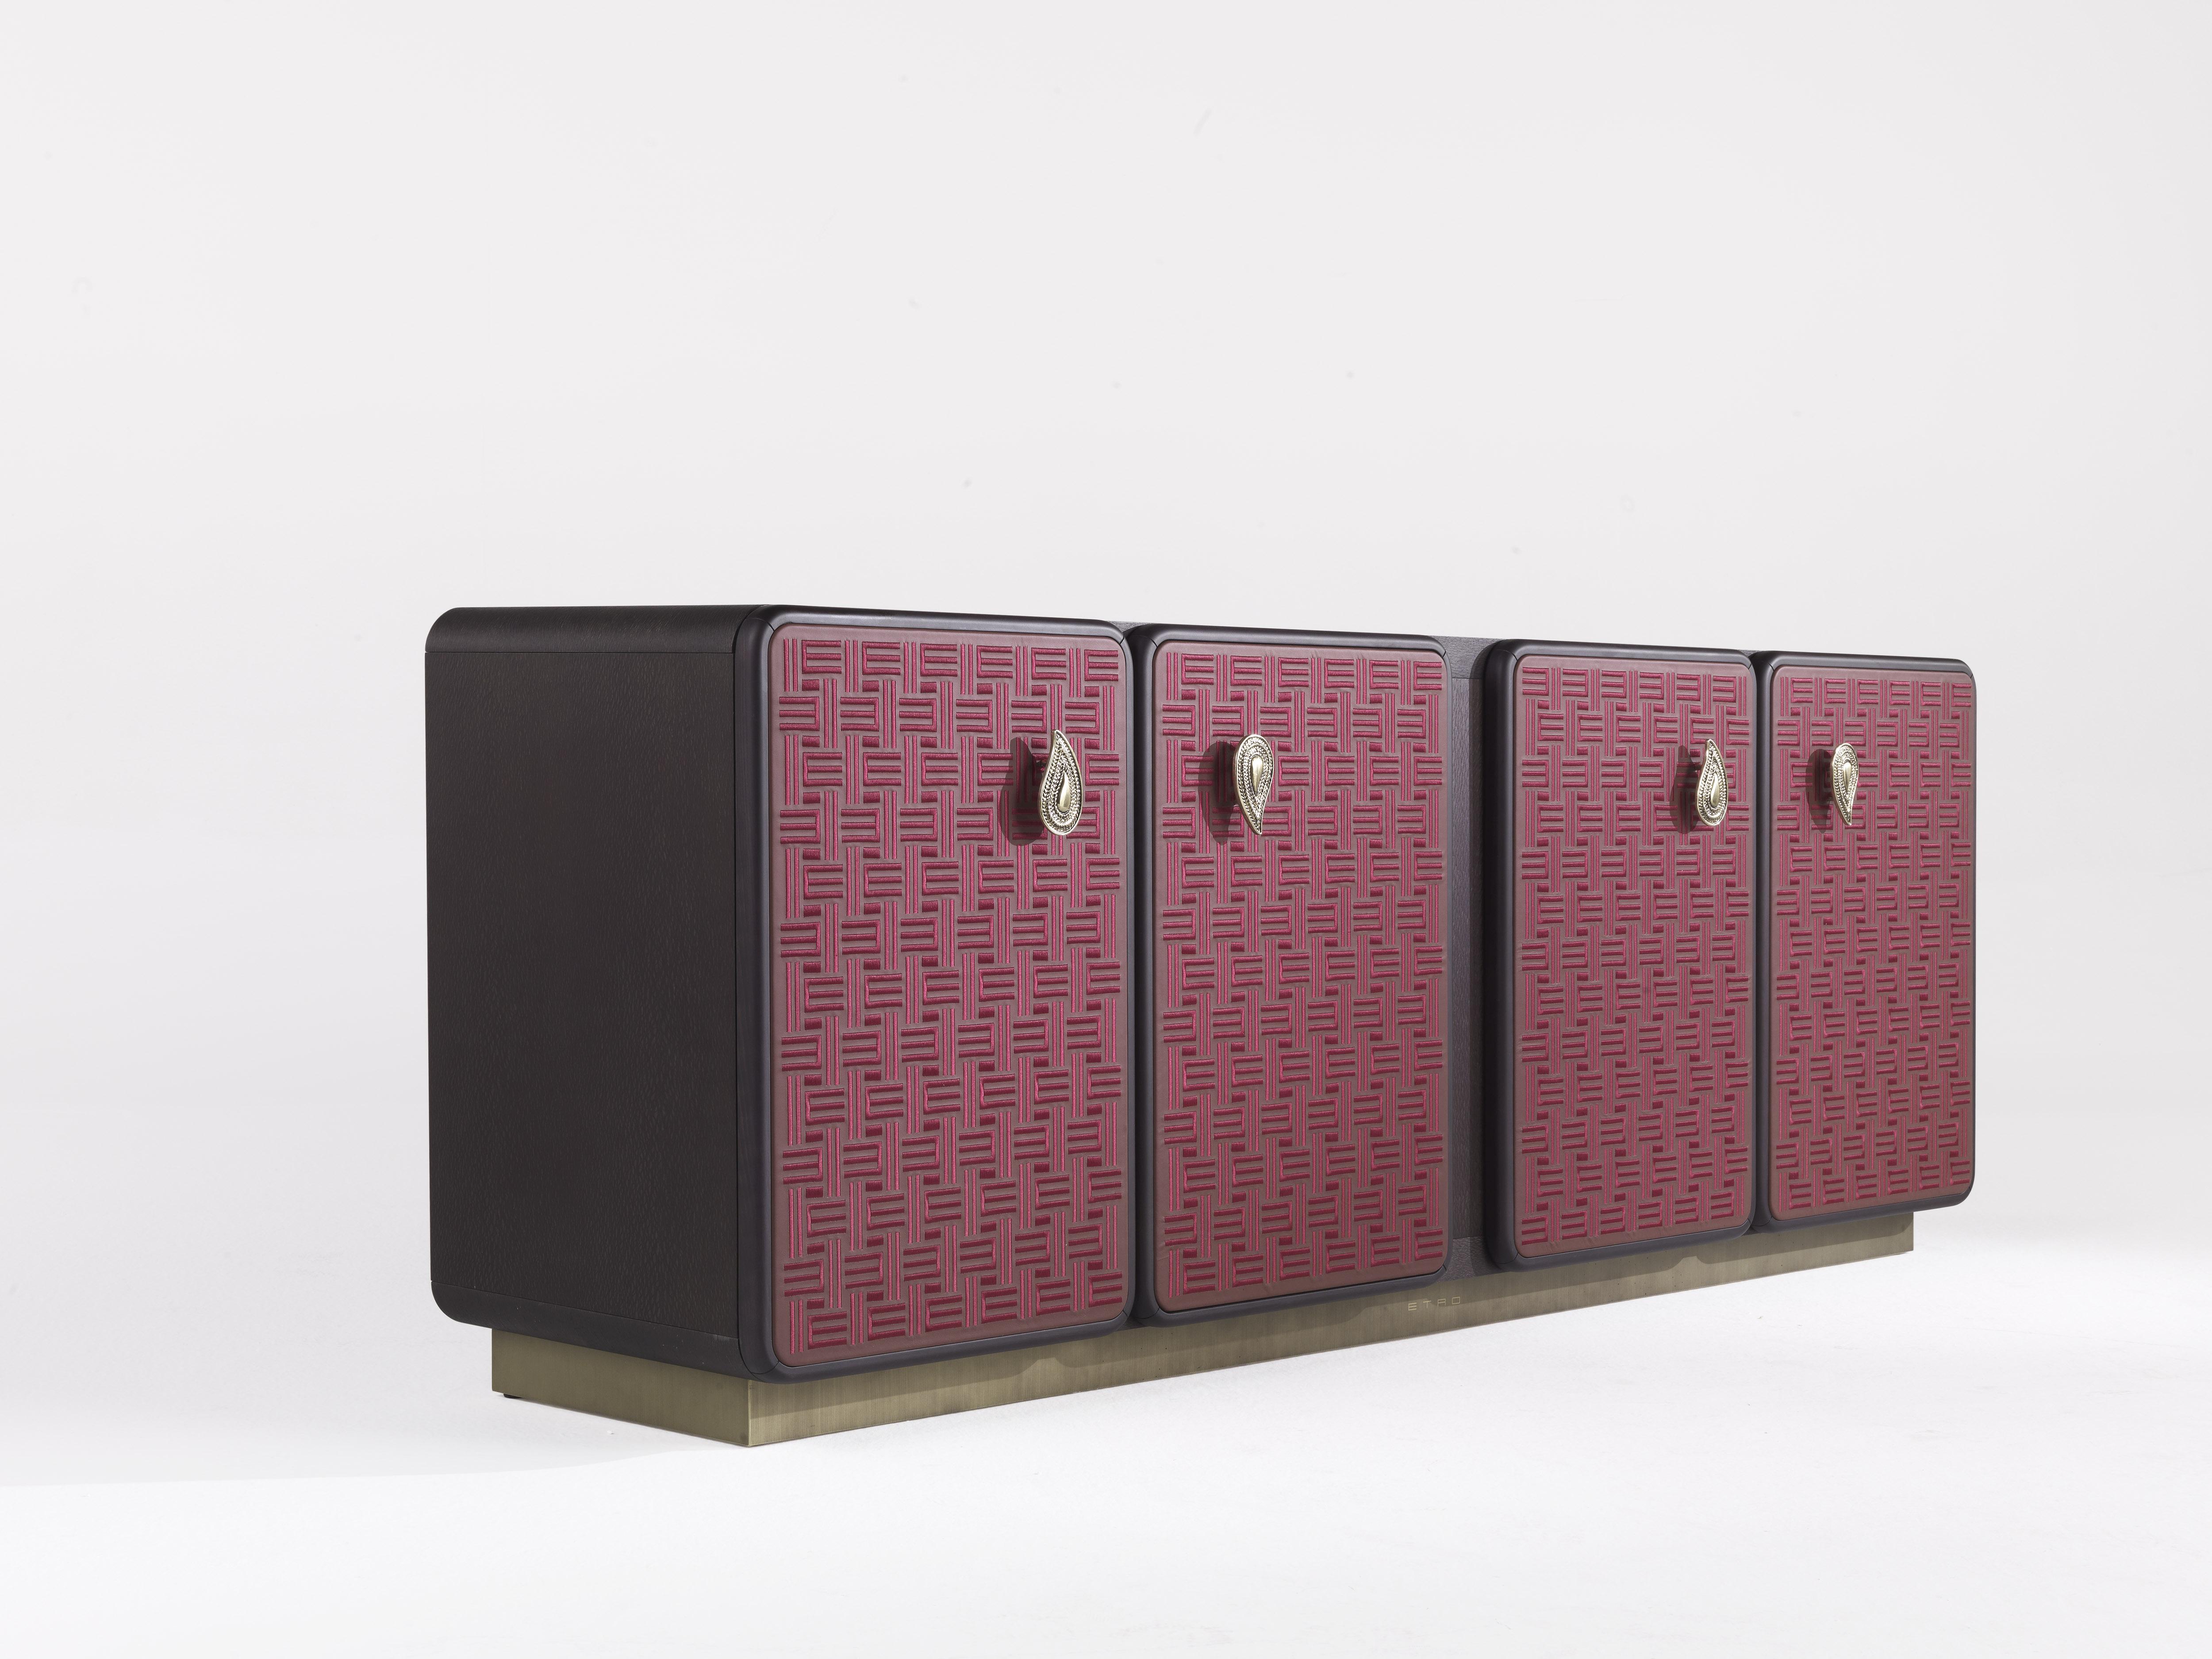 The evolution of the Caral line takes shape in this sideboard characterized by a precious upholstery with embossed leather with a pattern featuring the iconic “E” symbol, the initial letter of the Etro logo. The Paisley handle in polished brass, the